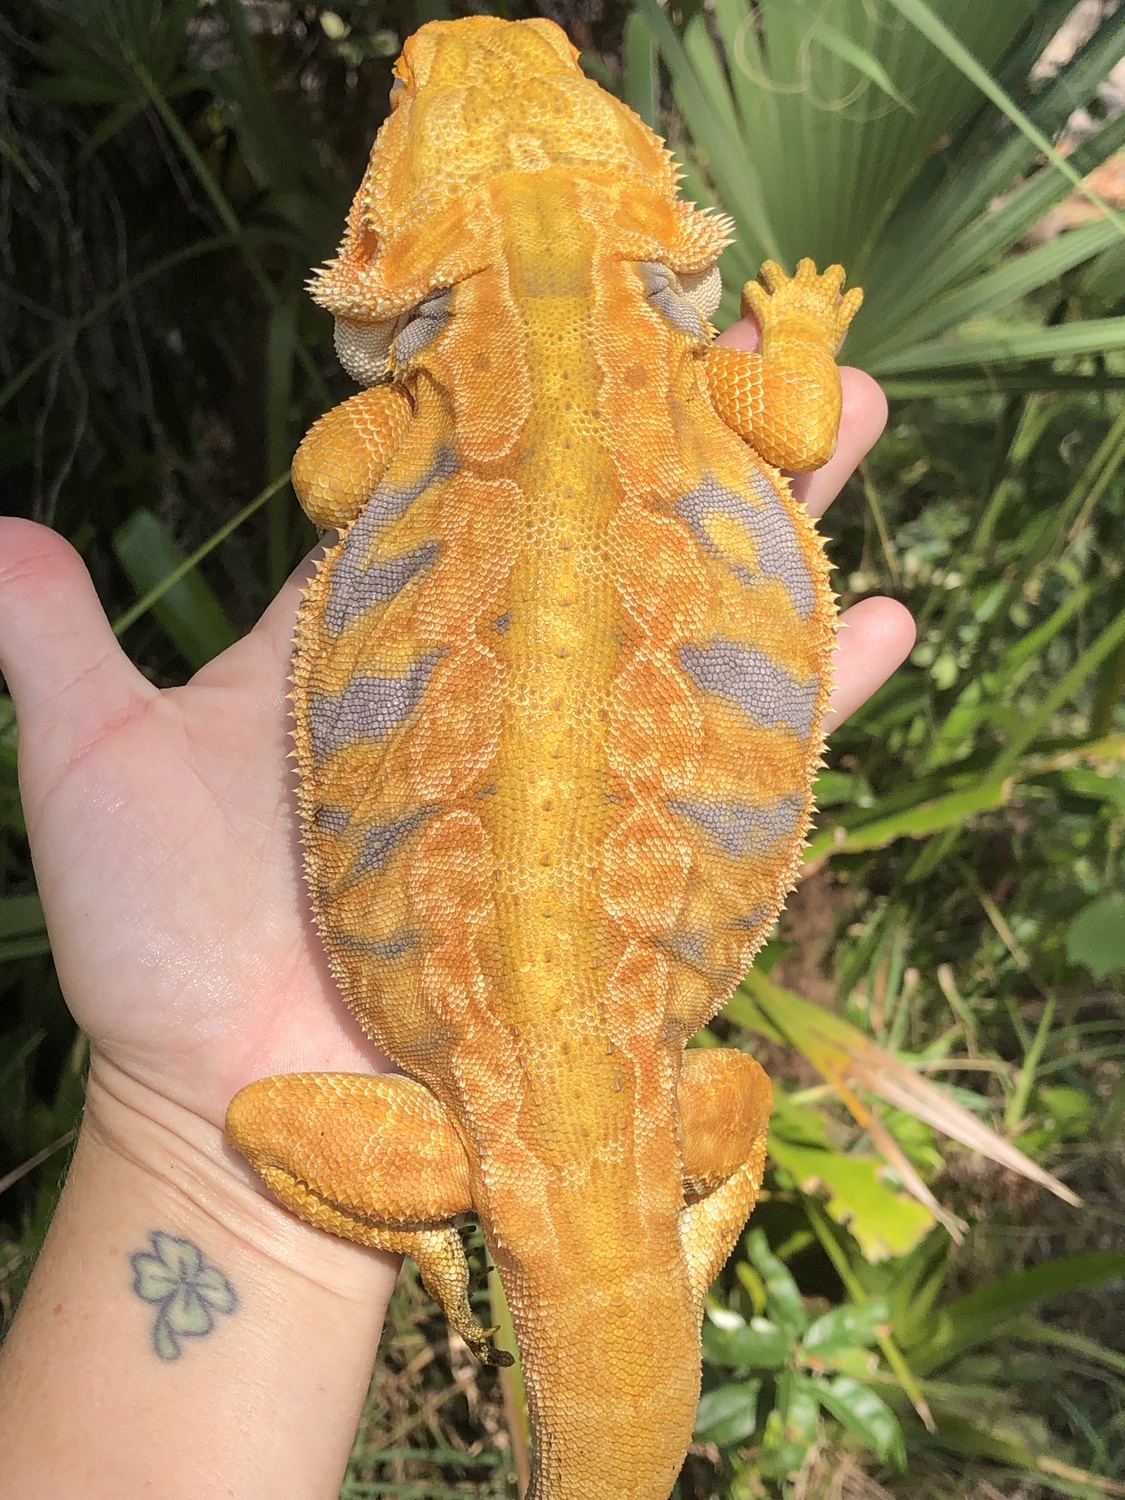 CITRUS Tiger Hypo Leatherback Adult Male RTB Central Bearded Dragon by Yellow Room Reptiles